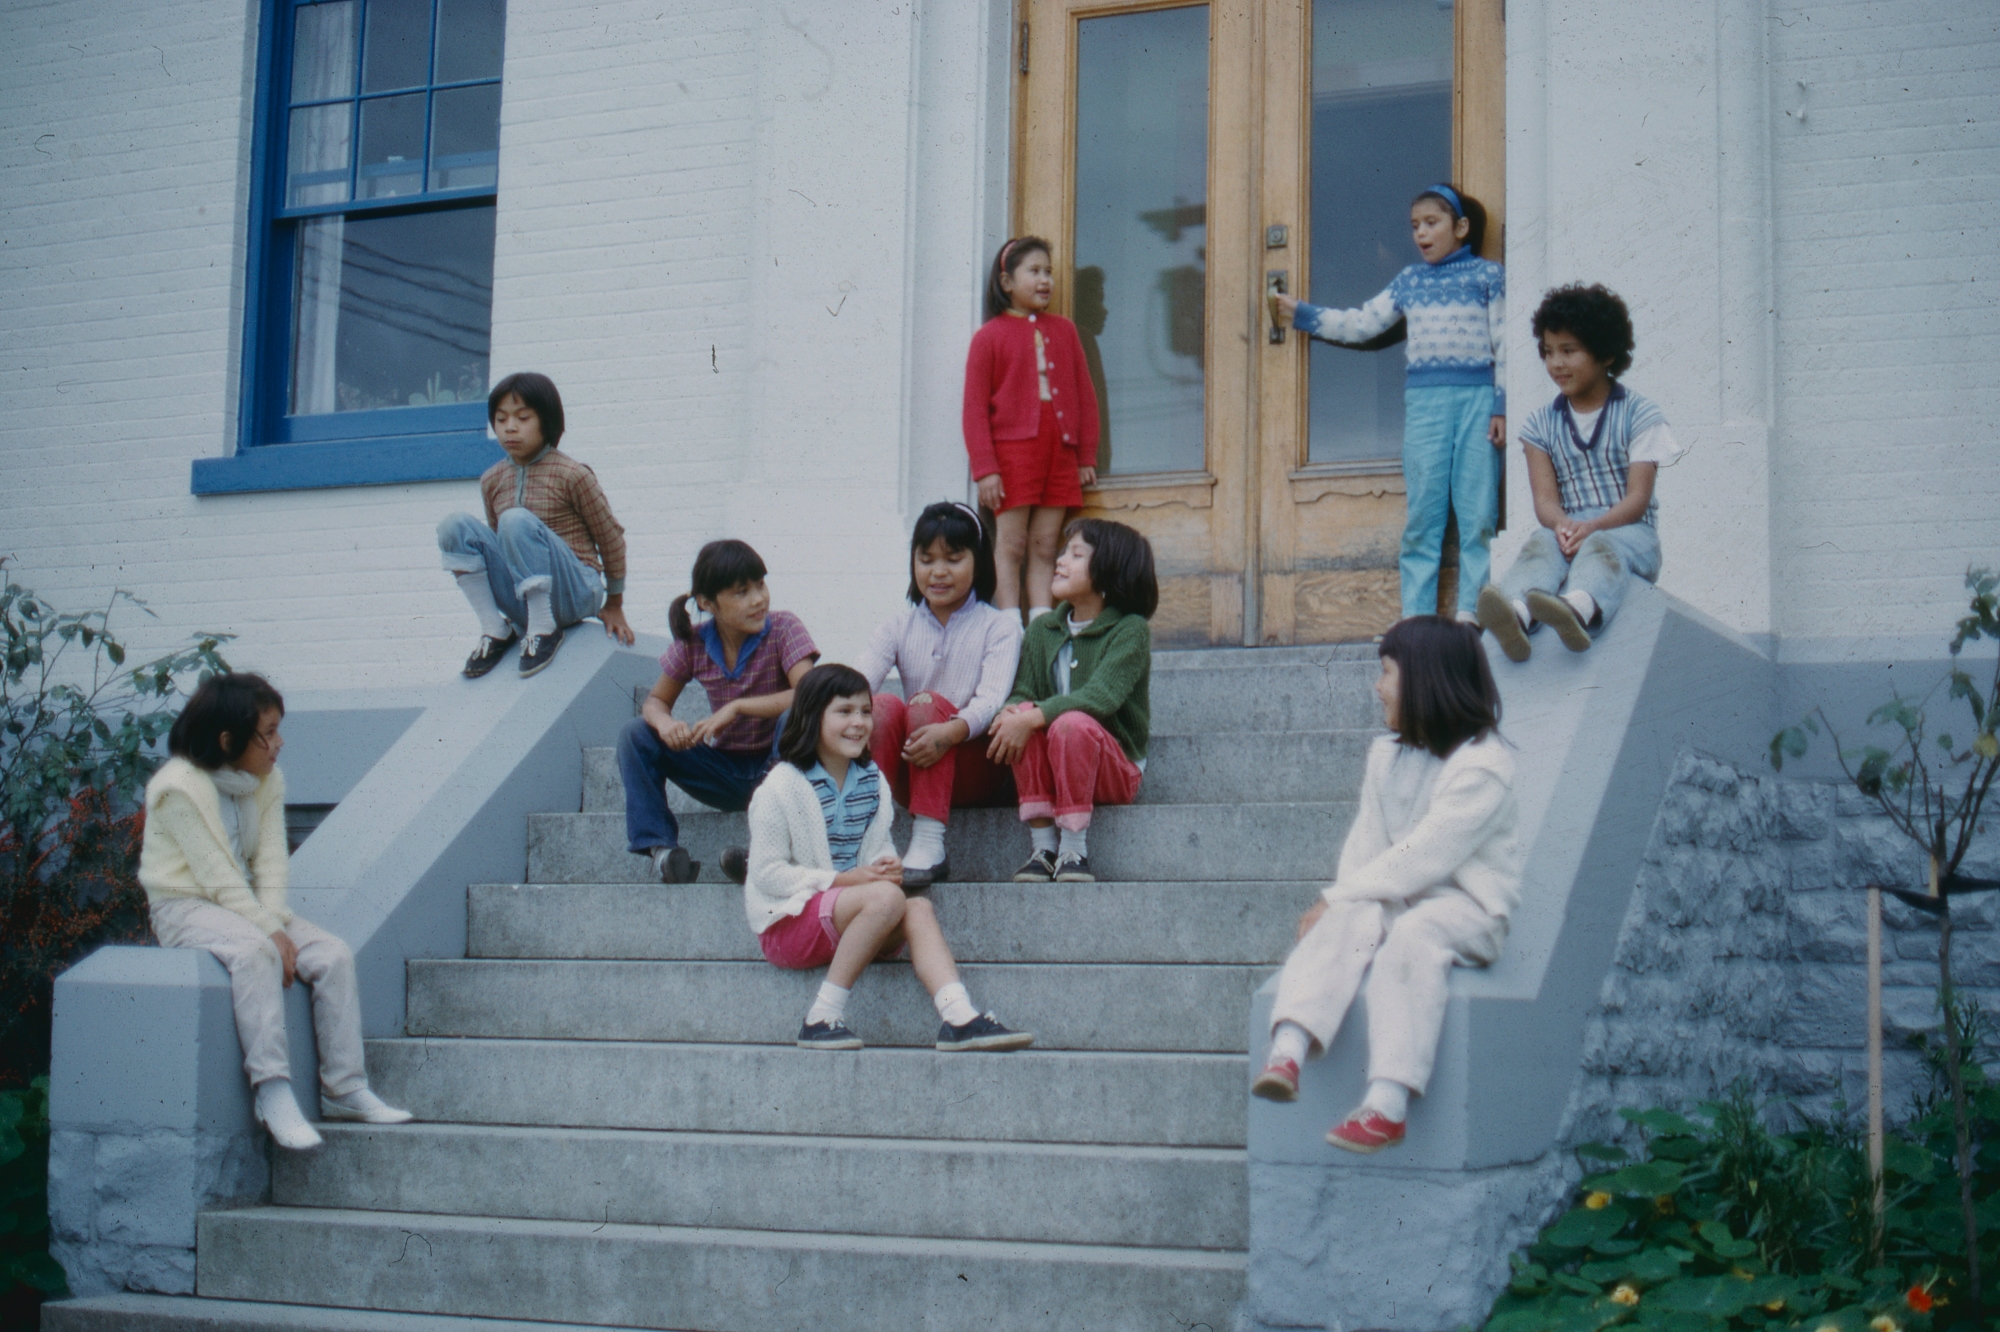 Ten children, all young, are sitting on wide steps that led to a white brick building.